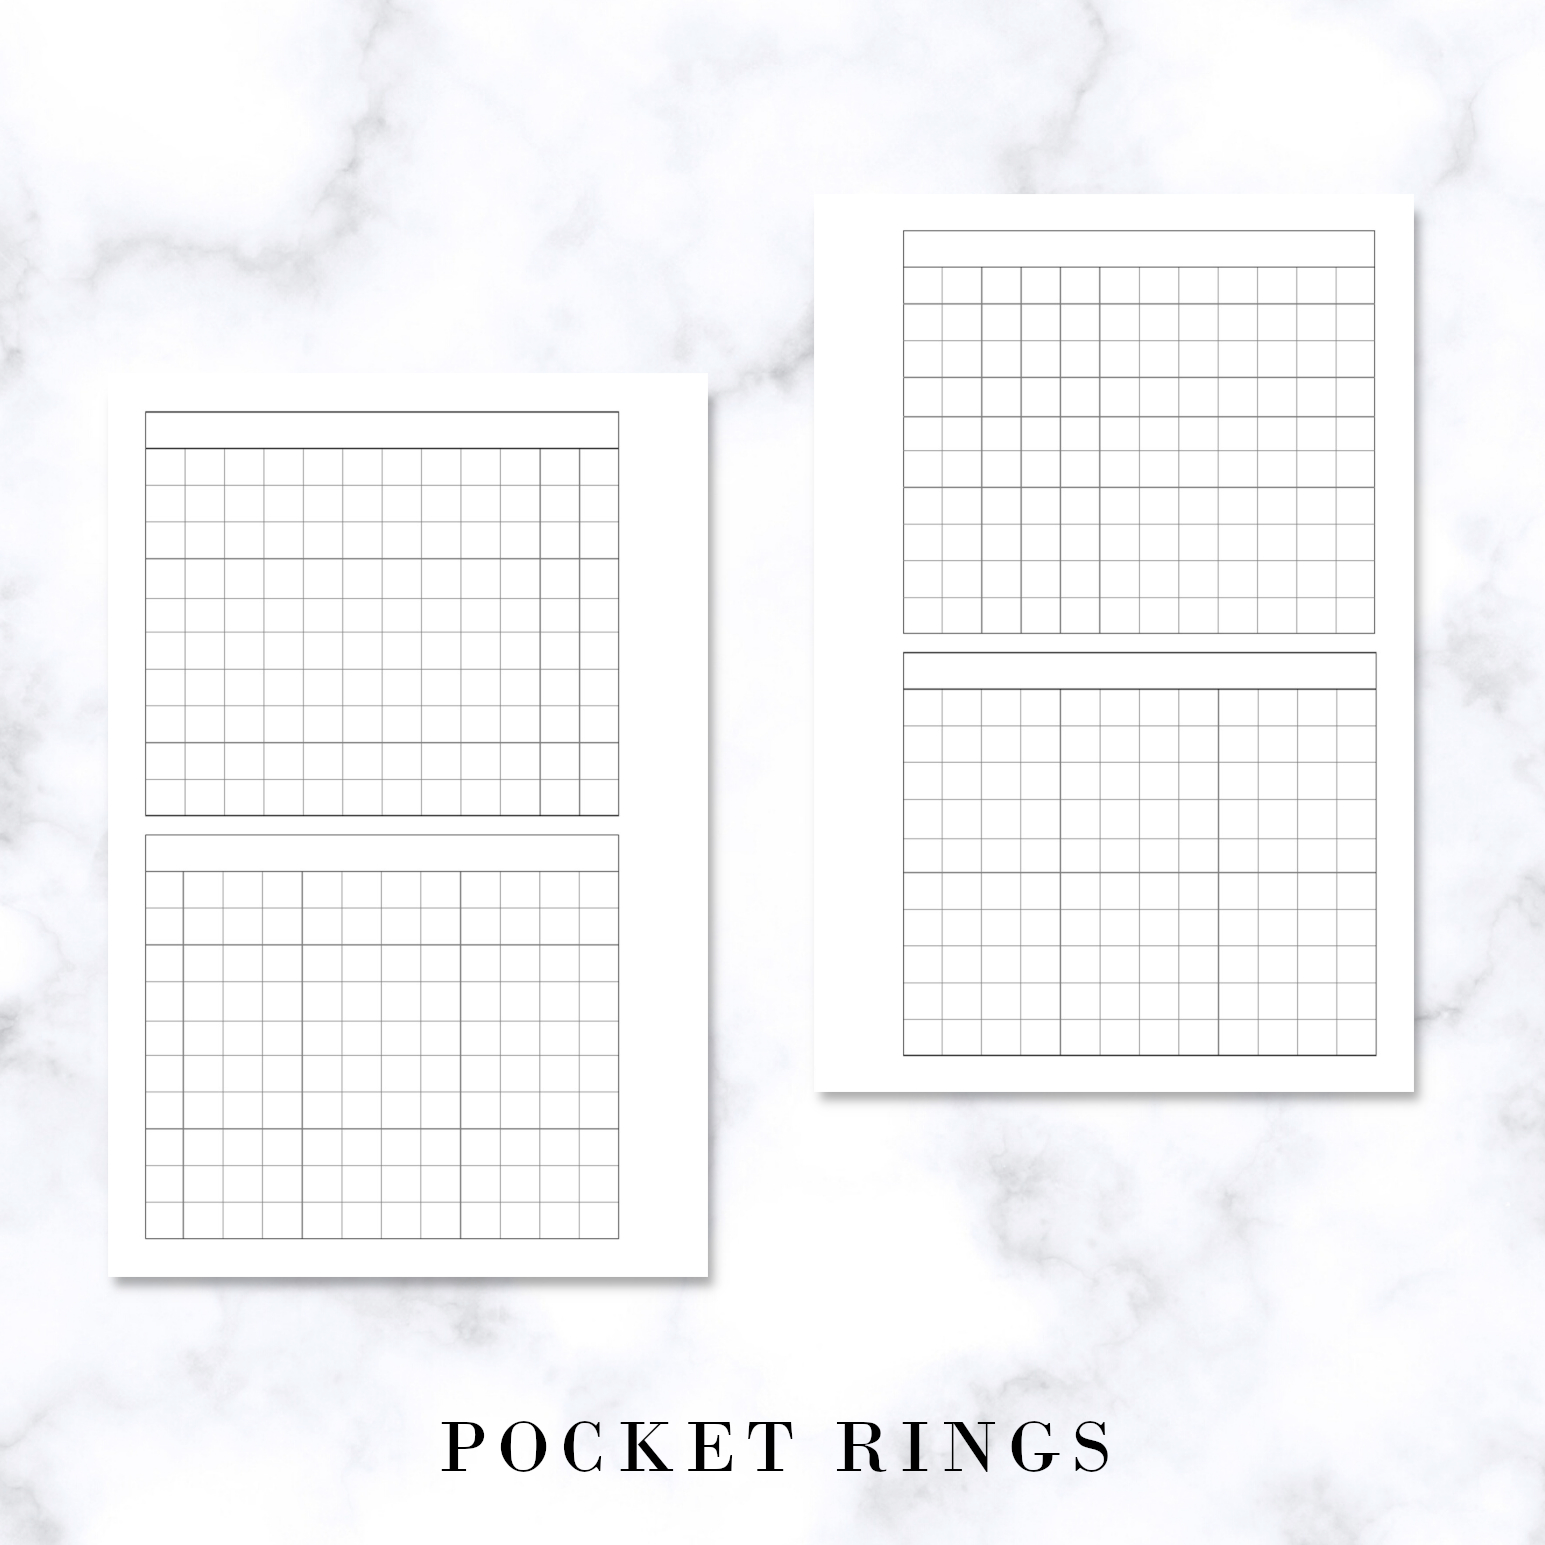 Free Planner Printable For A Pocket Rings Planner! Use